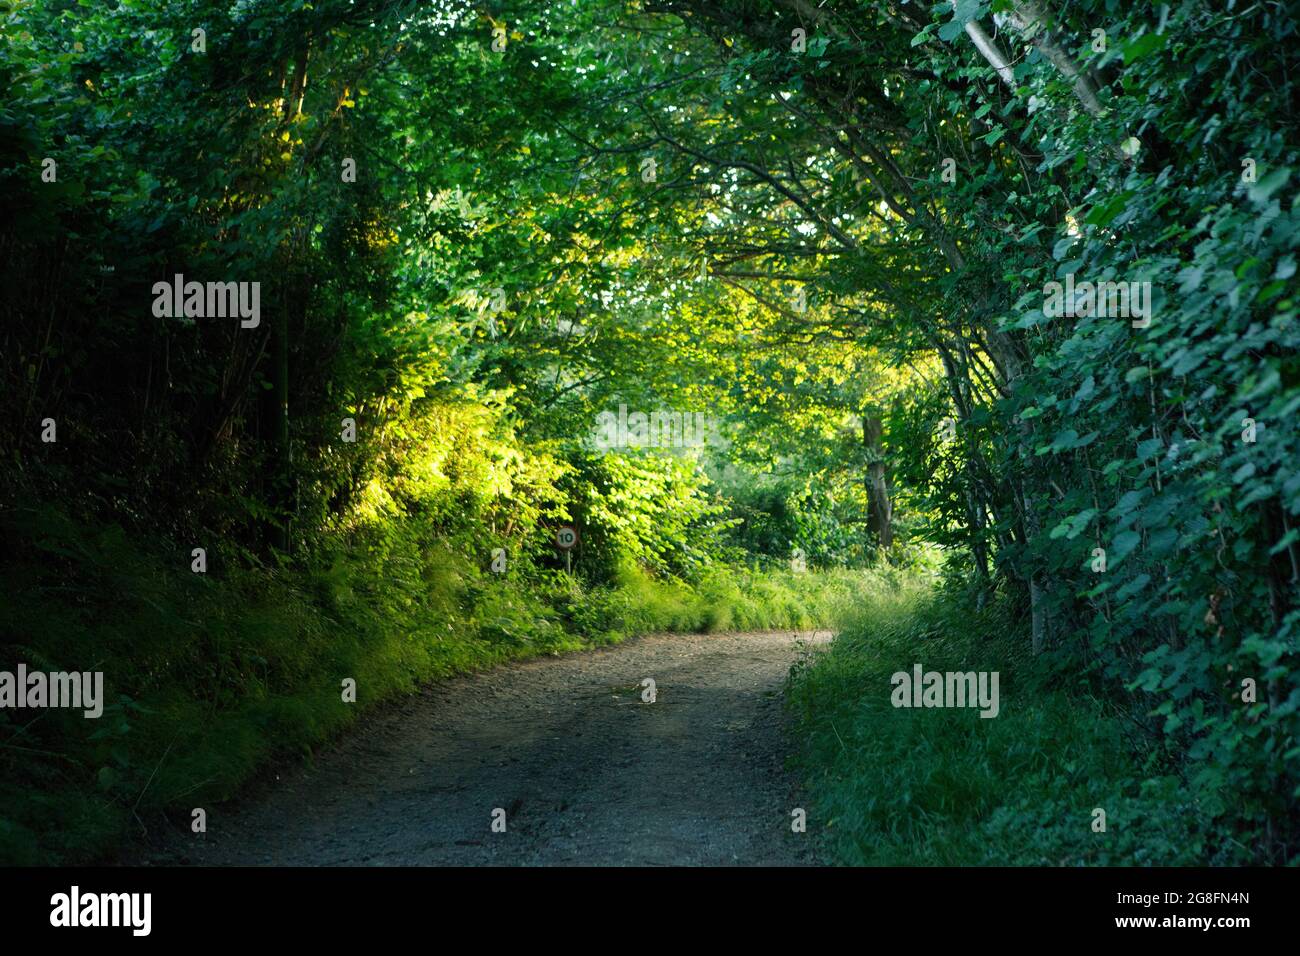 Hugget's Farm, East Sussex, UK, 16 July 2021: A 'green tunnel' of trees over a lane in the East Sussex countryside. A speed limit sign warns traffic t Stock Photo